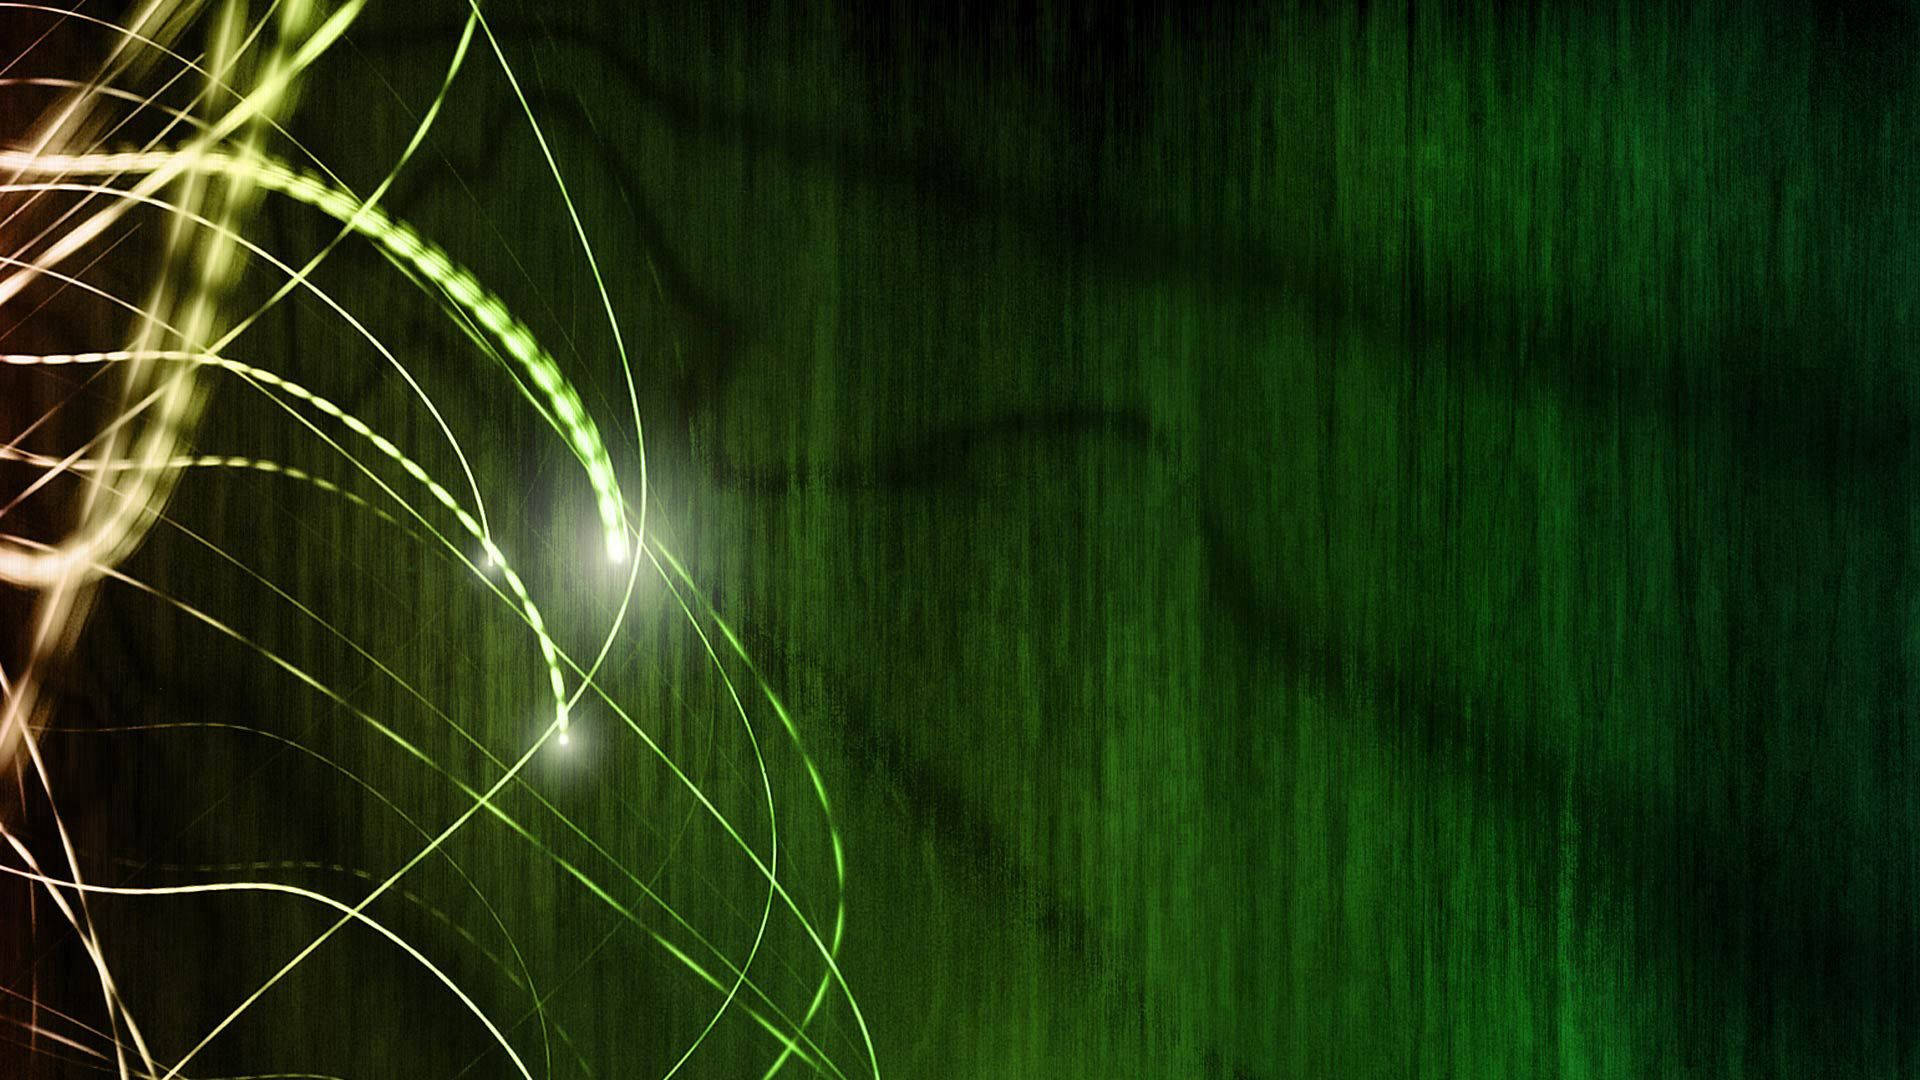 Green 1920X1080 Wallpaper and Background Image